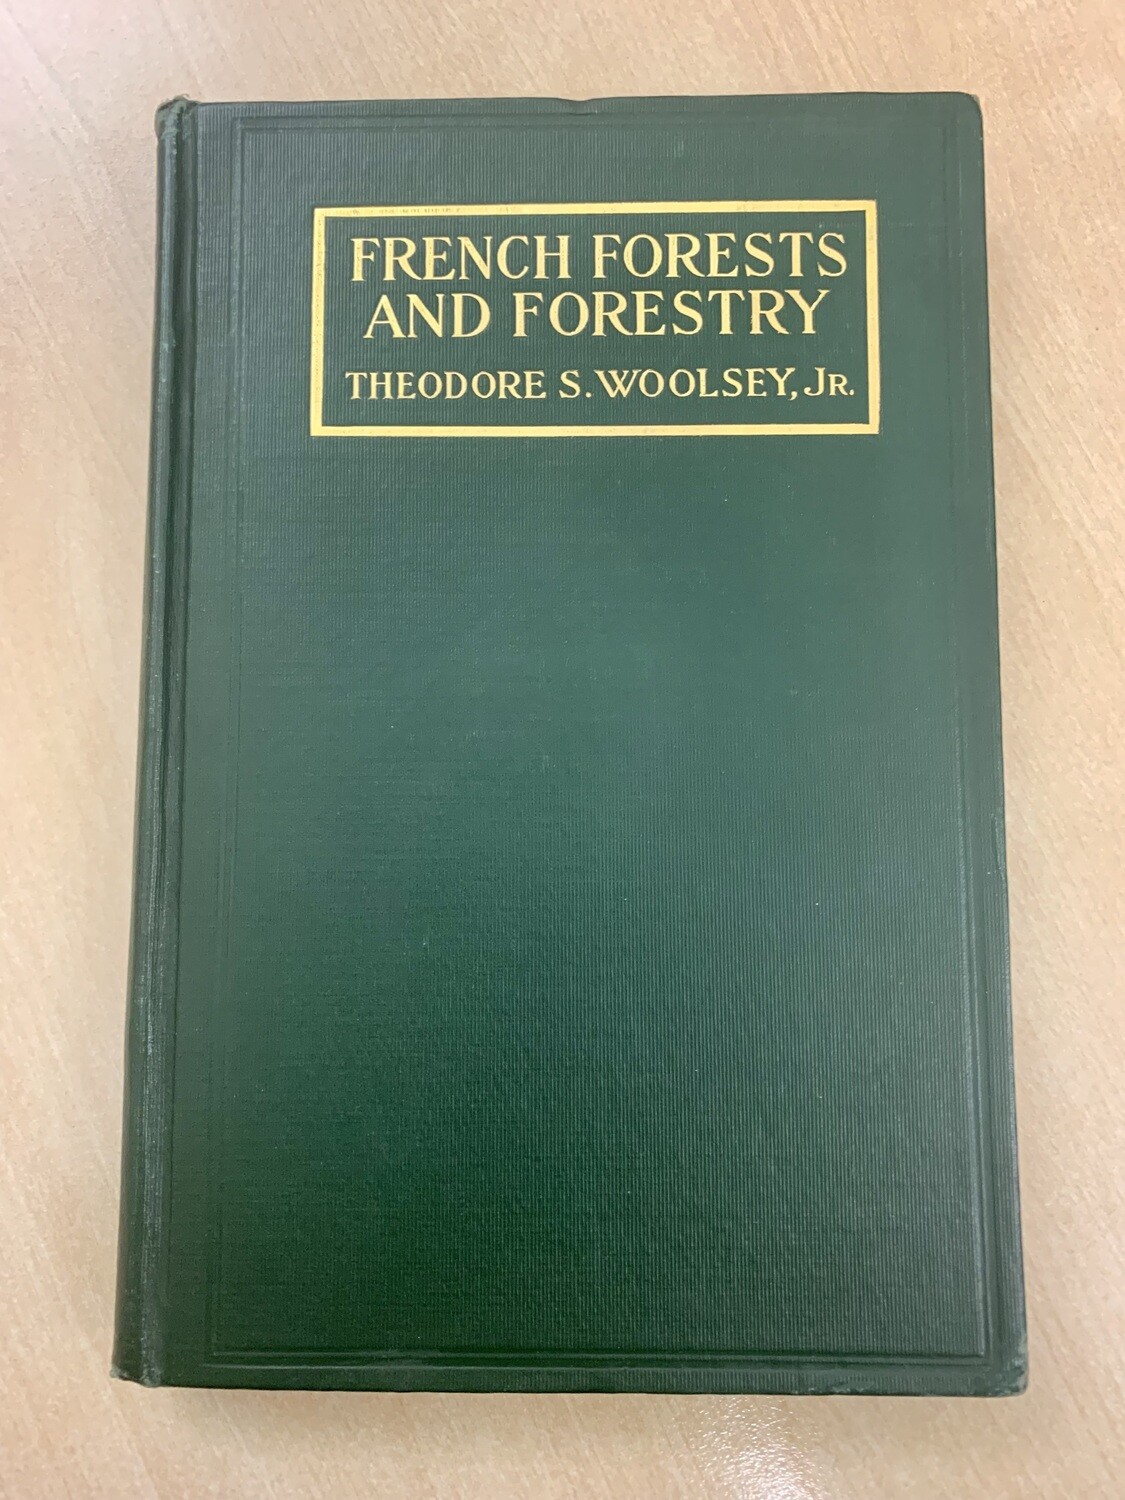 'French Forests and Forestry' by Theodore S. Woolsey Jr.